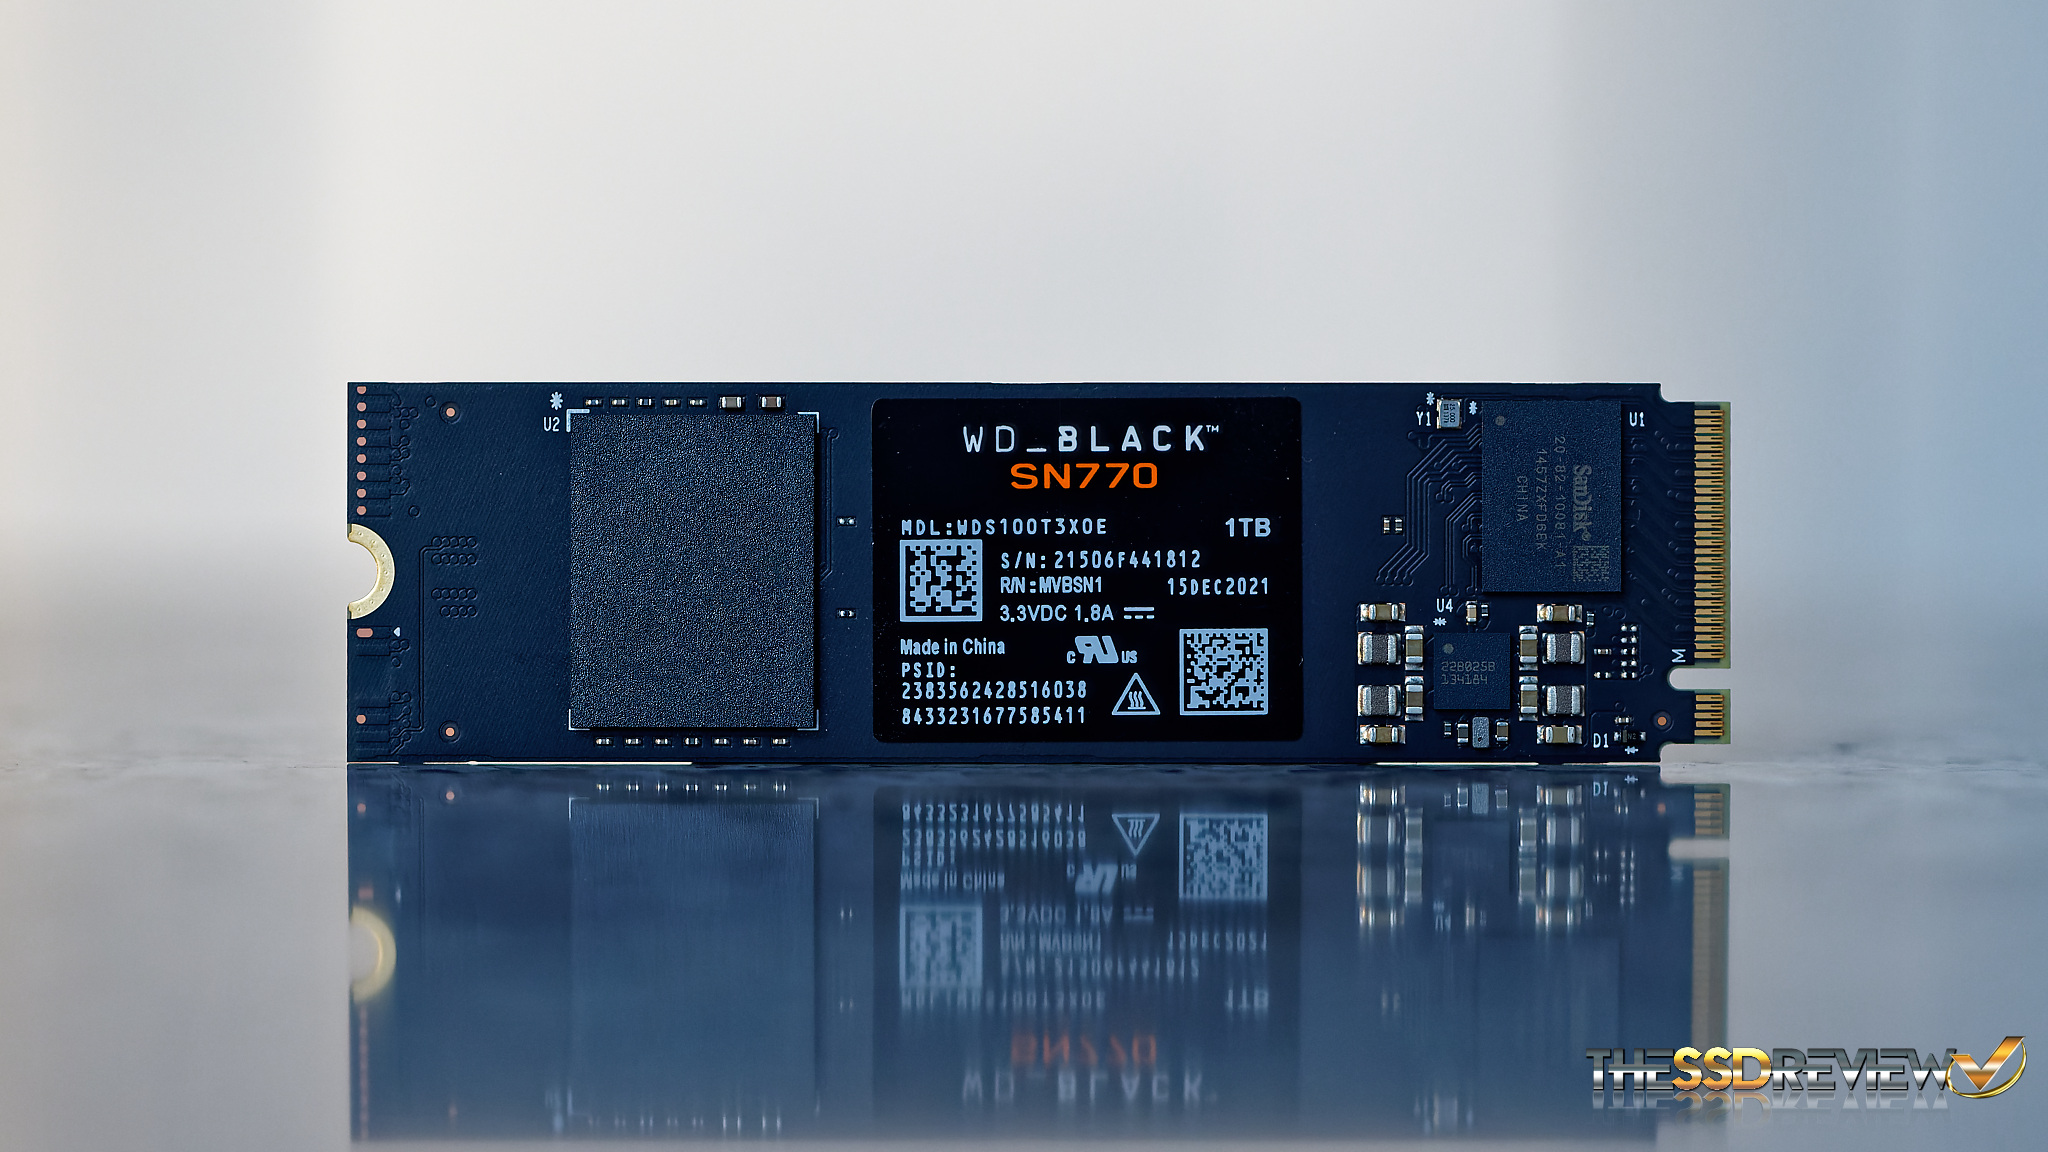 WD_Black SN770 Gen 4 SSD Review - Don't Let Its Good Looks Fool